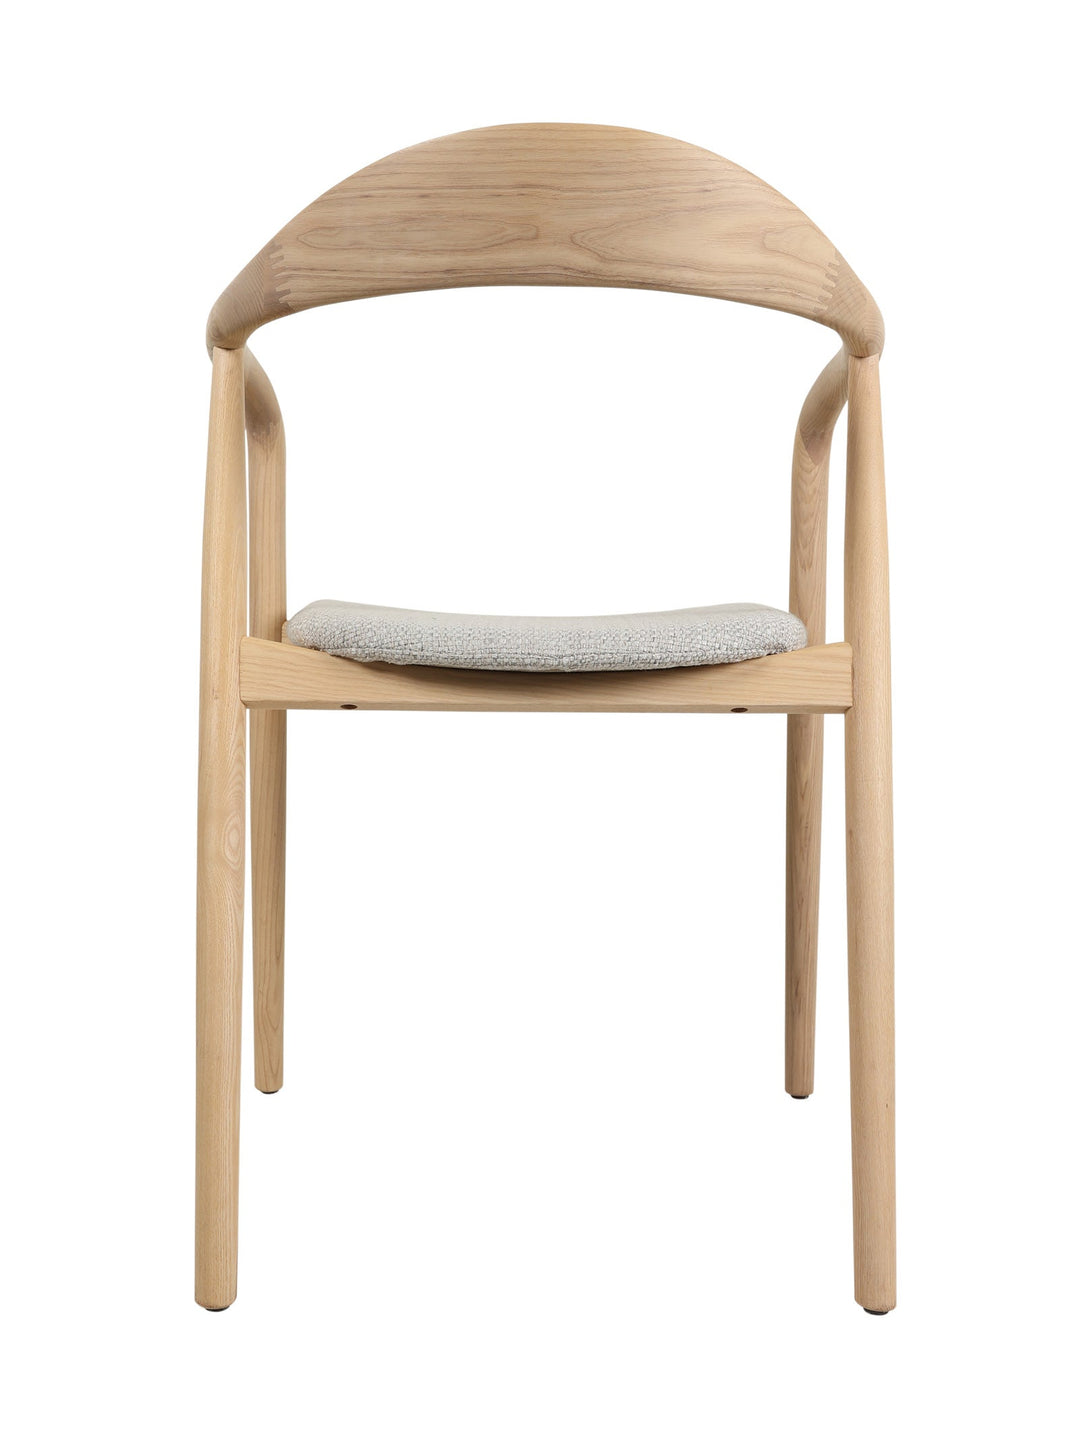 Grace Dining Chair - Kitchen & Dining Room Chairs- Hertex Haus Online - Furniture